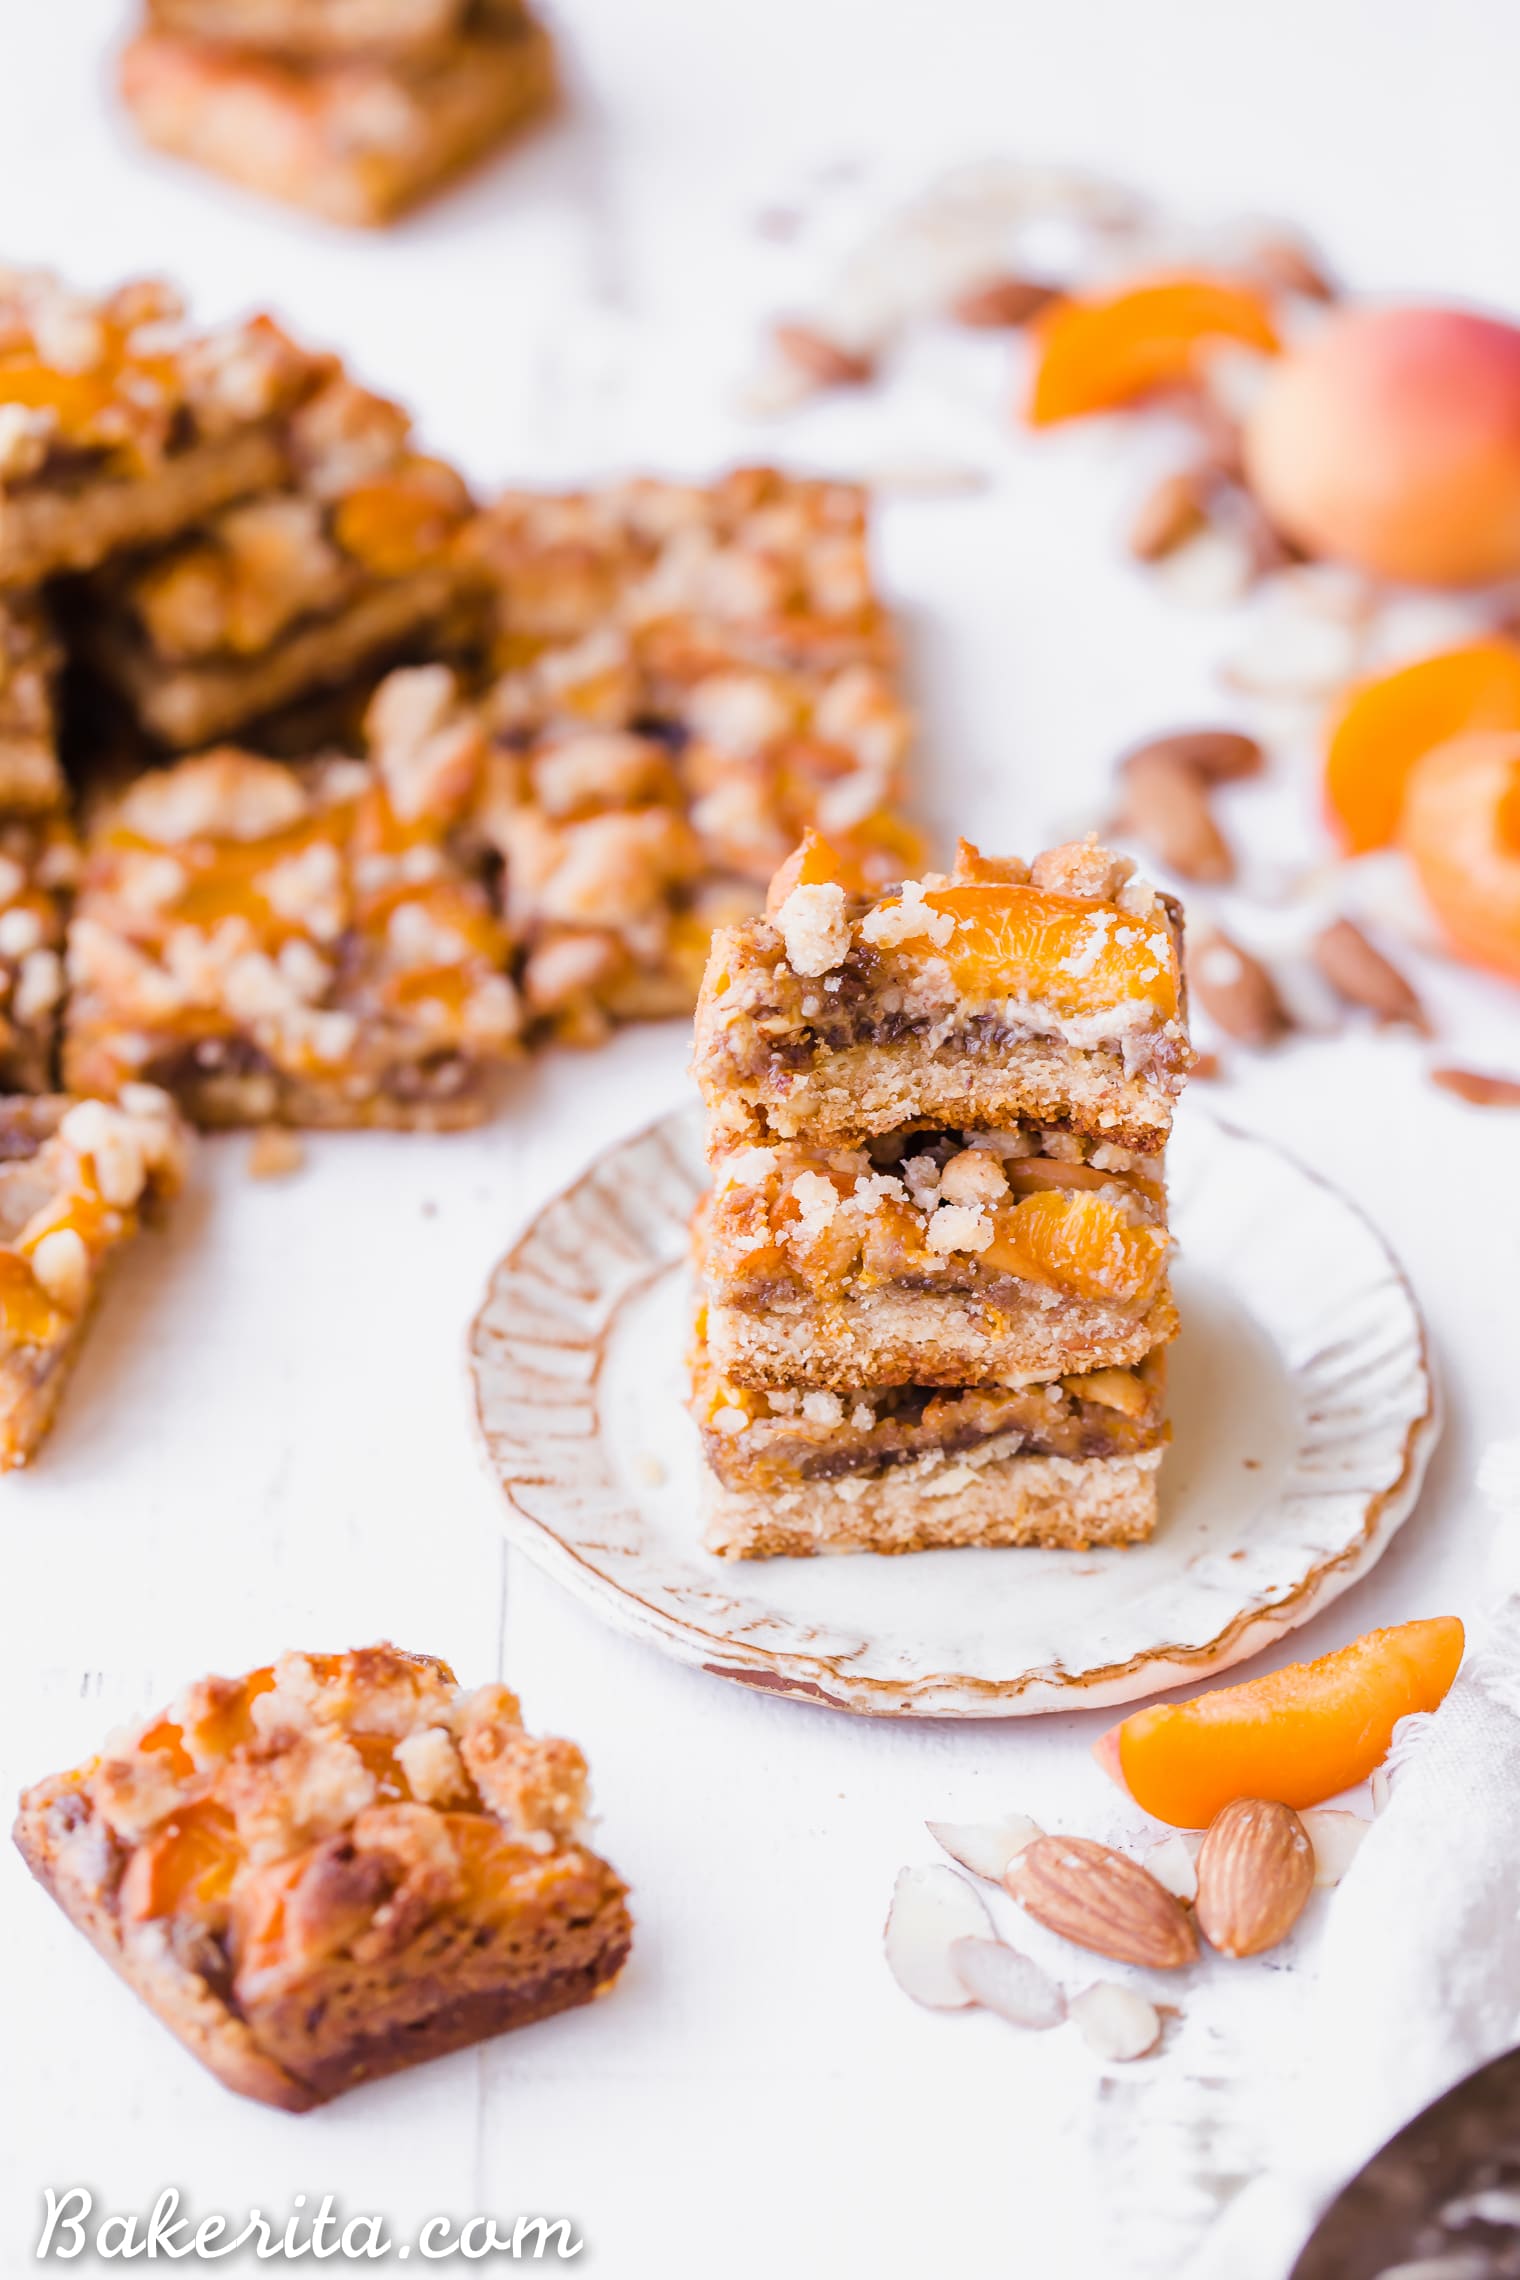 In these Apricot Frangipane Bars, apricots and almonds come together in the most delightful way - the shortbread crust is topped with an almond frangipane filling and topped with fresh, juicy apricots. These gluten-free, paleo, and vegan bars are irresistibly delicious. You can customize them with your favorite stone fruit, too!